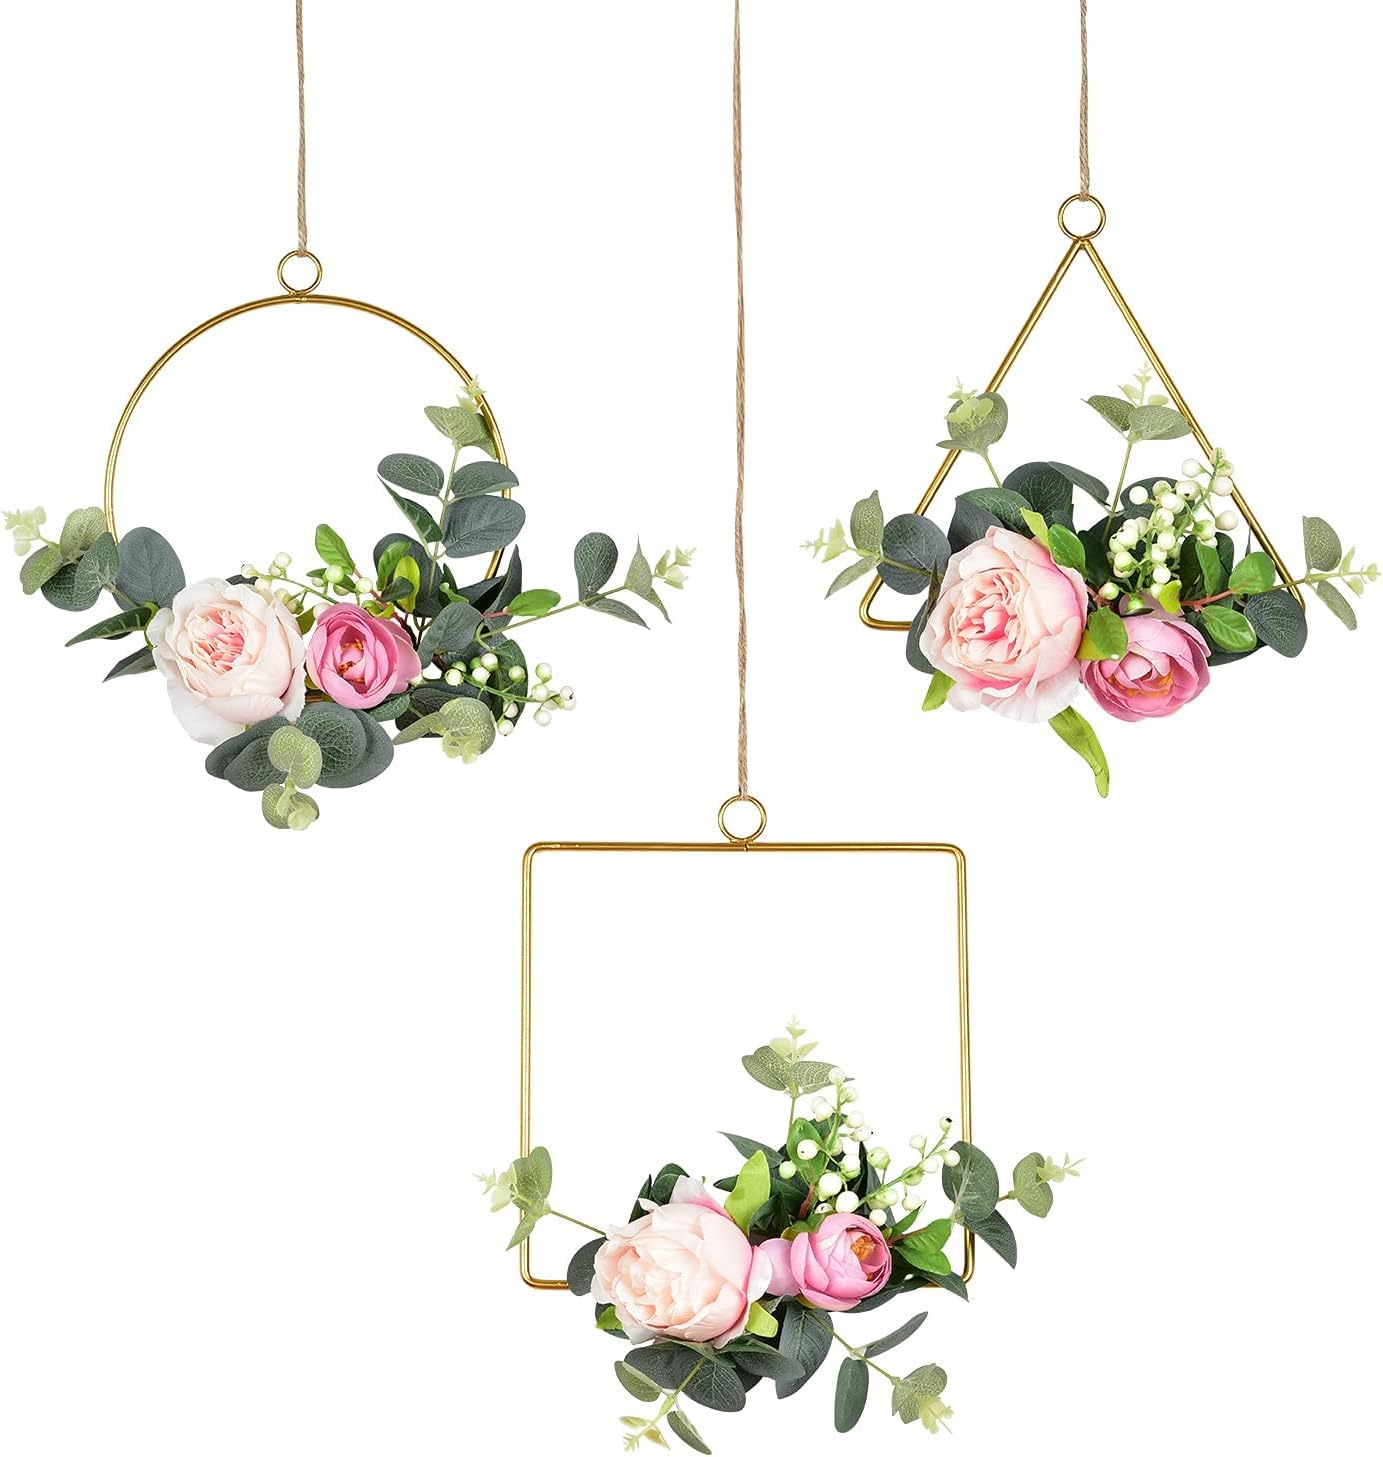 Artificial Flower Hoop Wreath, Set of 3 Hanging Floral Wall Decor with Silk Roses and Eucalypts Leaves for Wedding Party Nursery Wall Home Decoration